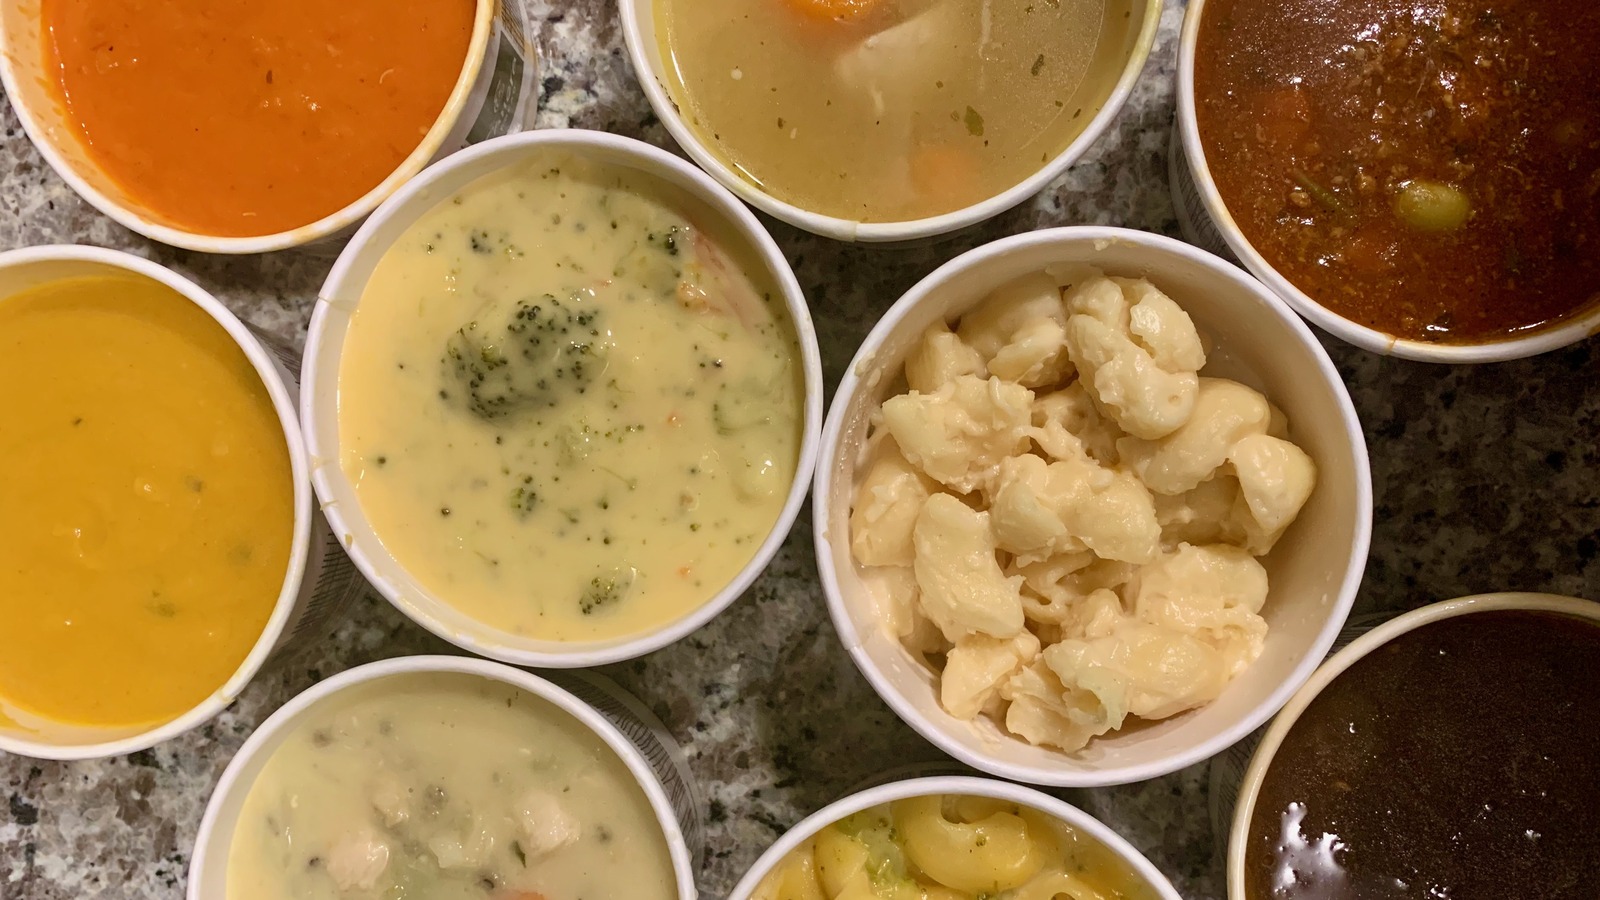 9 Soups And Macs From Panera Bread, Ranked Worst To Best Tasting